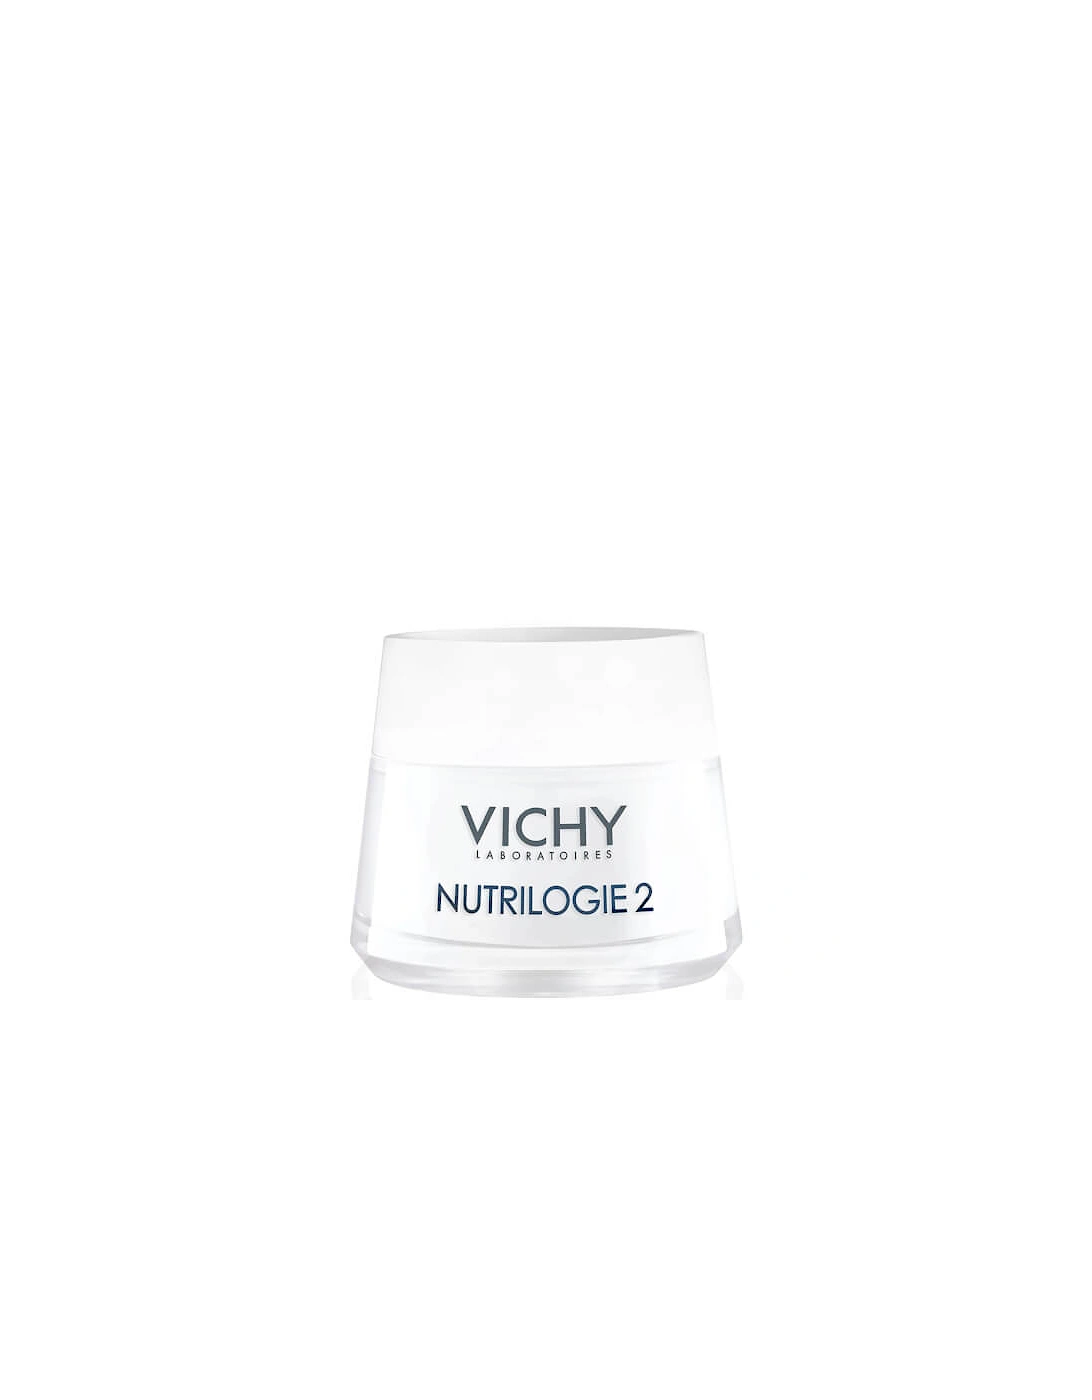 Nutrilogie 2 Intense Day Cream for Very Dry Skin 50ml - Vichy, 2 of 1